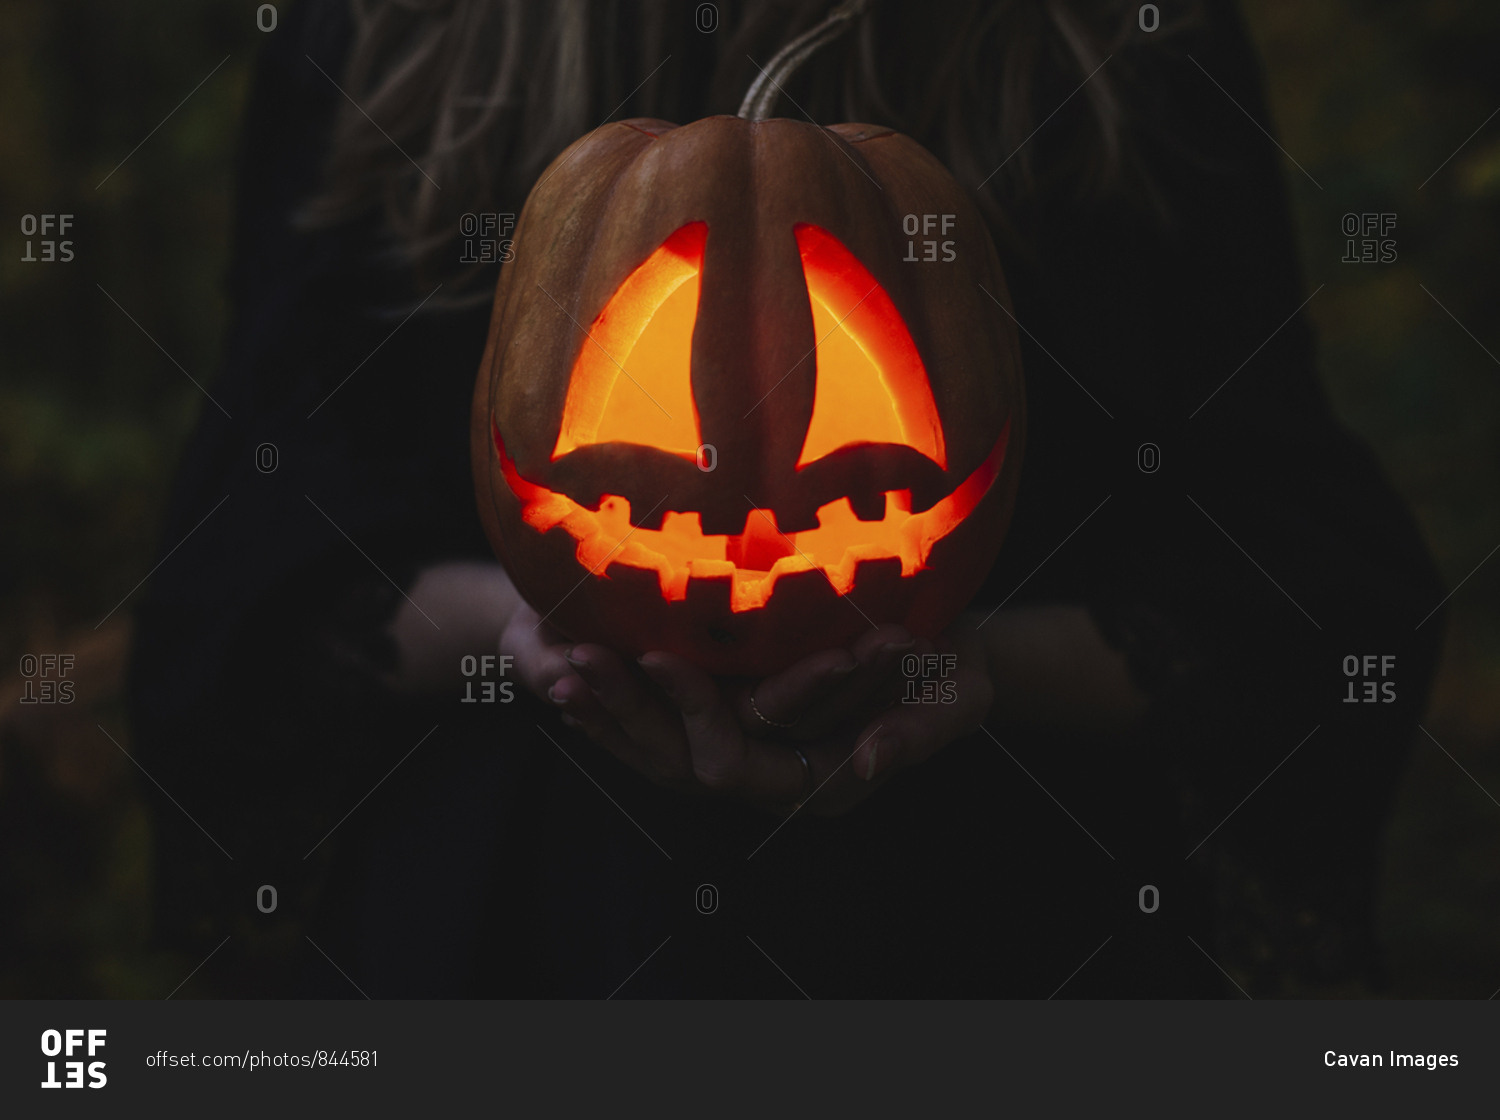 Close-up of woman hands holding illuminated jack o' lantern in forest during Halloween